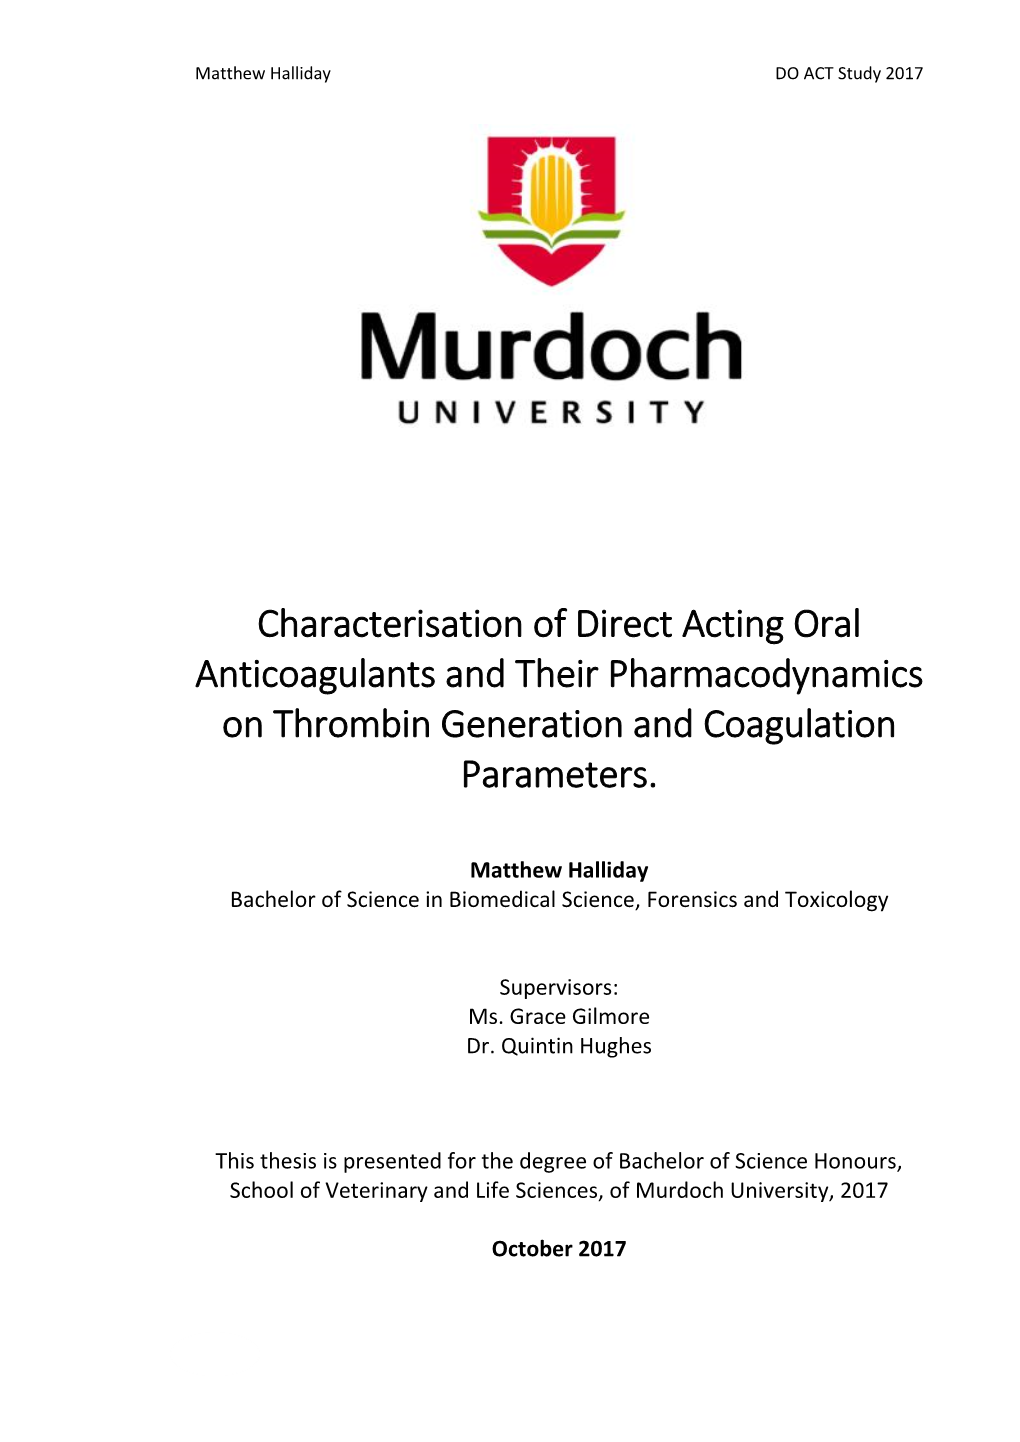 Characterisation of Direct Acting Oral Anticoagulants and Their Pharmacodynamics on Thrombin Generation and Coagulation Parameters